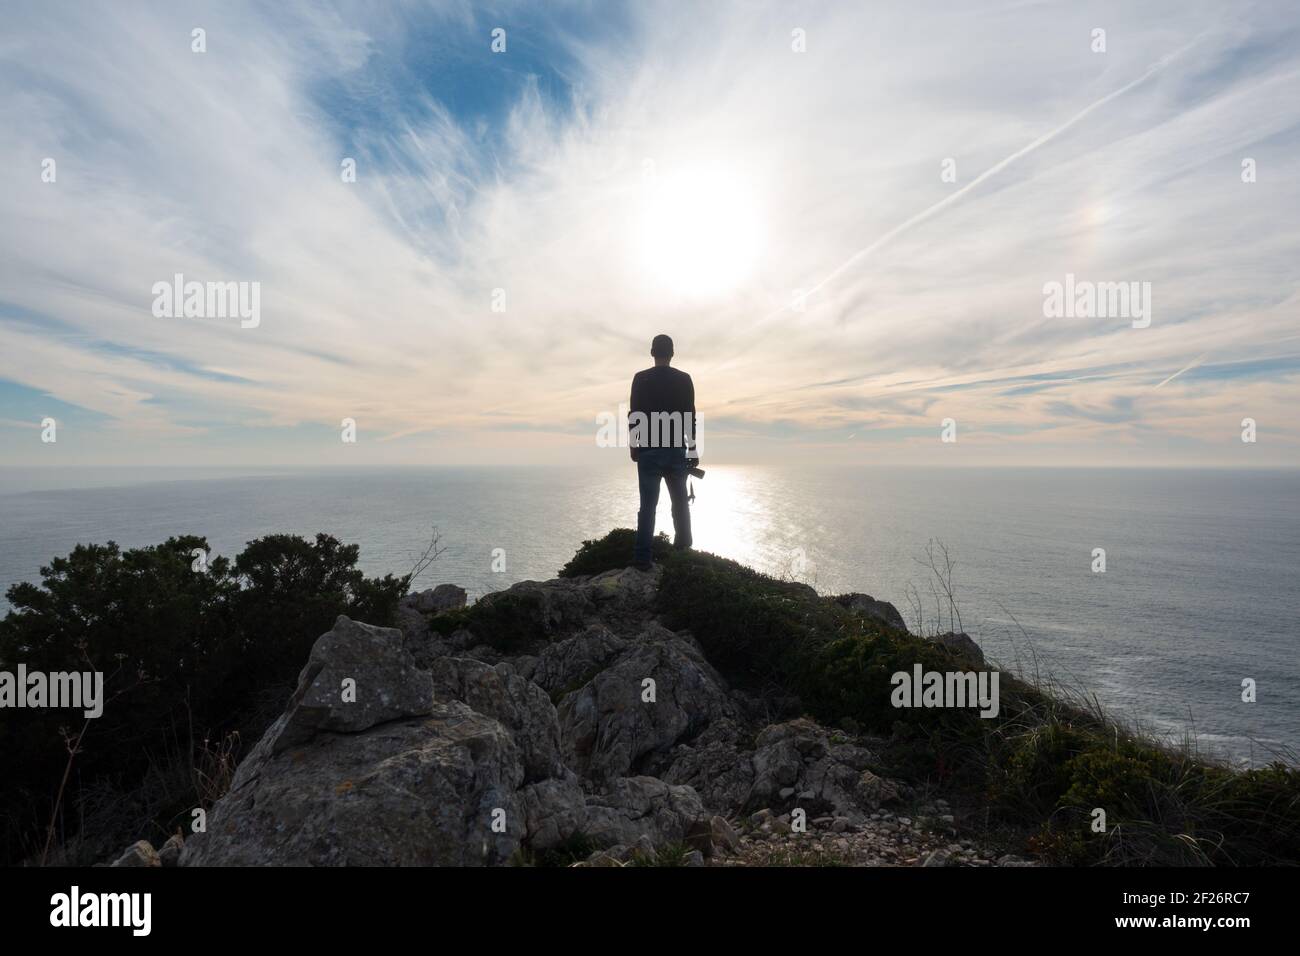 Man photographer silhouette with a camera on the hand on a cliff with the ocean sea on the background Stock Photo